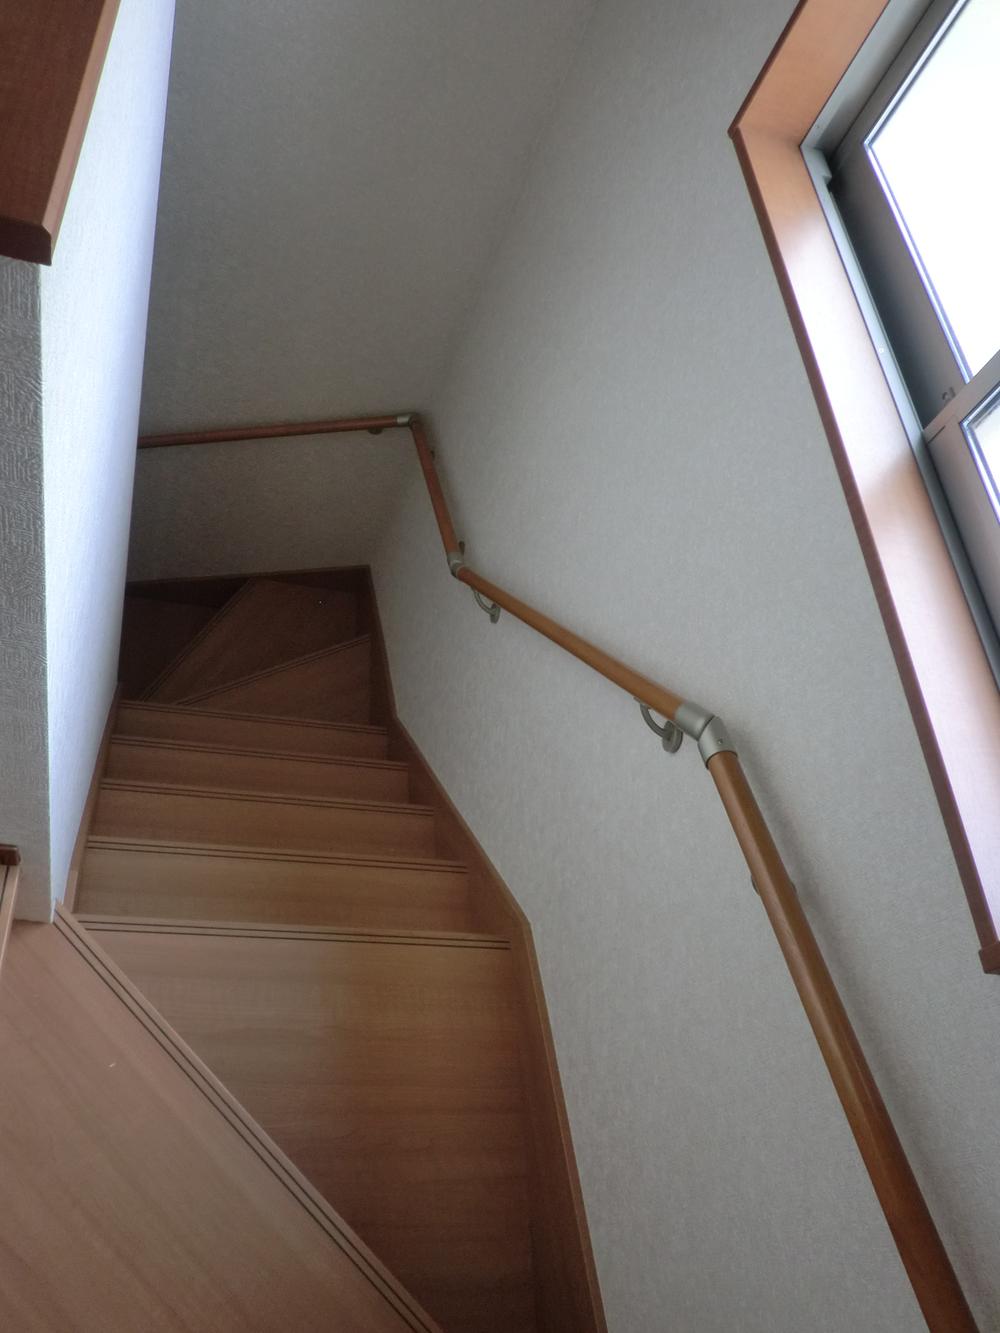 Other. It is peace of mind with a handrail stairs around